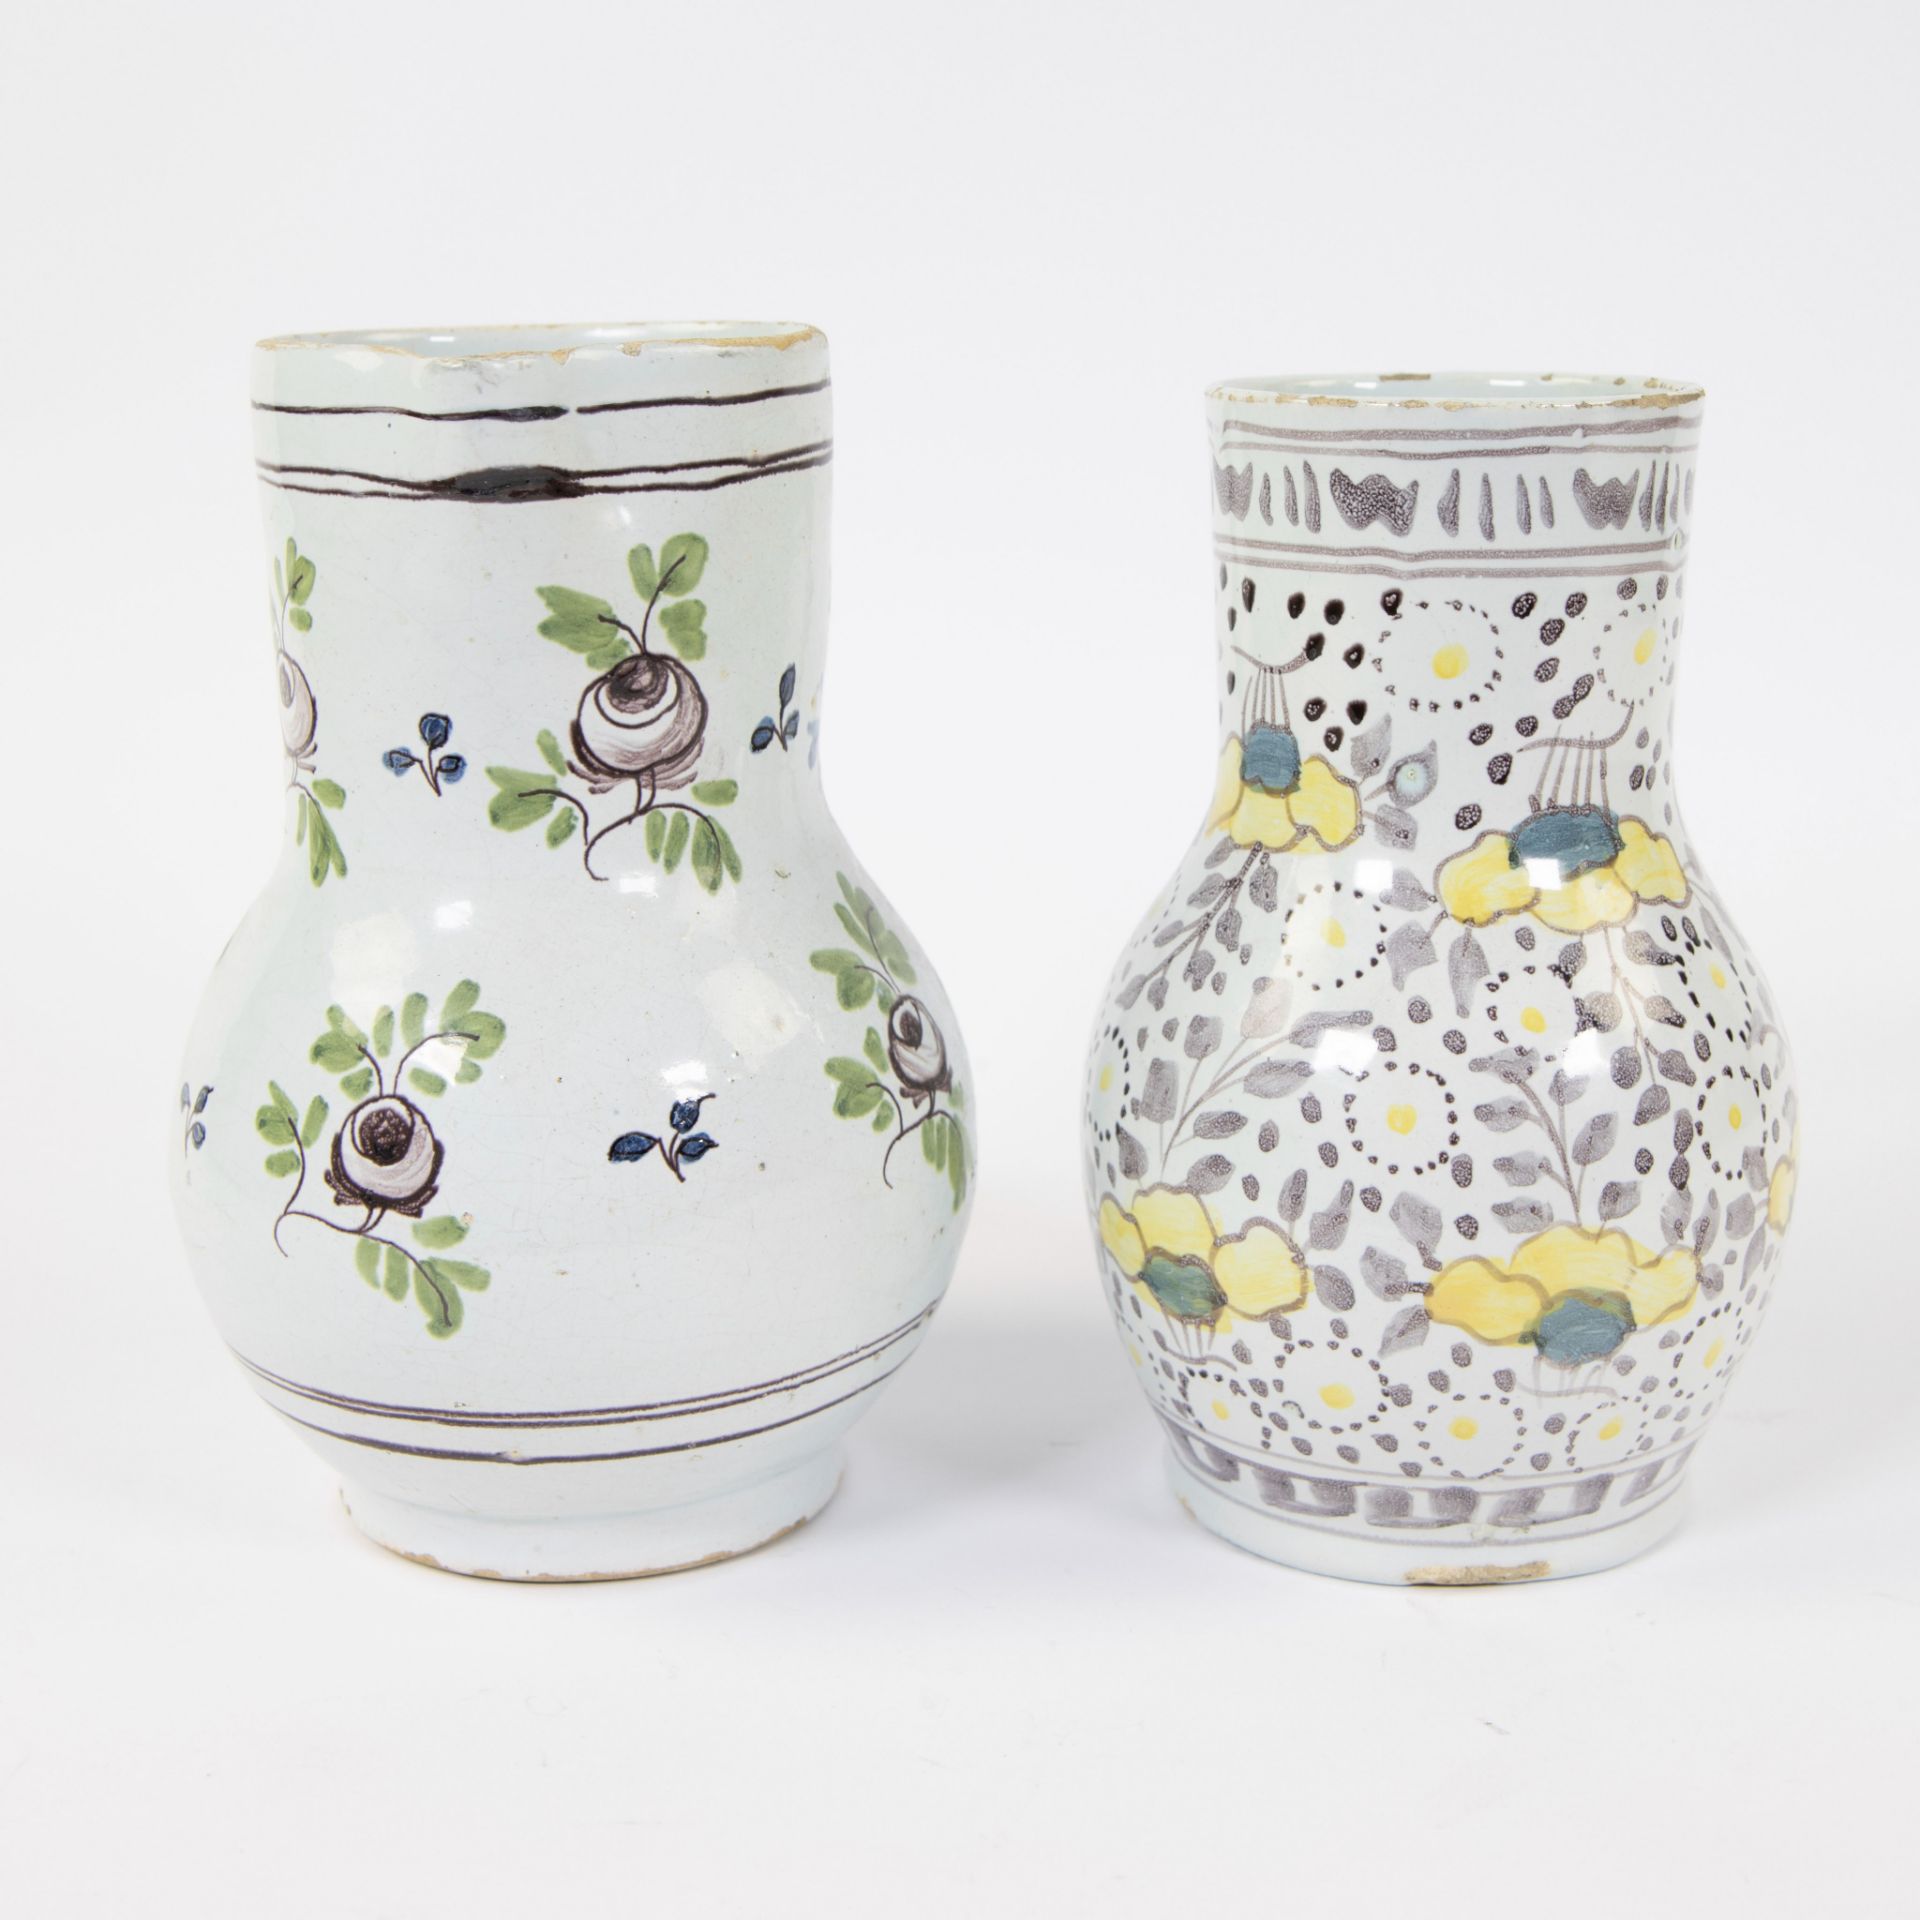 2 jugs with polychromy in faience 18th century - Image 2 of 5